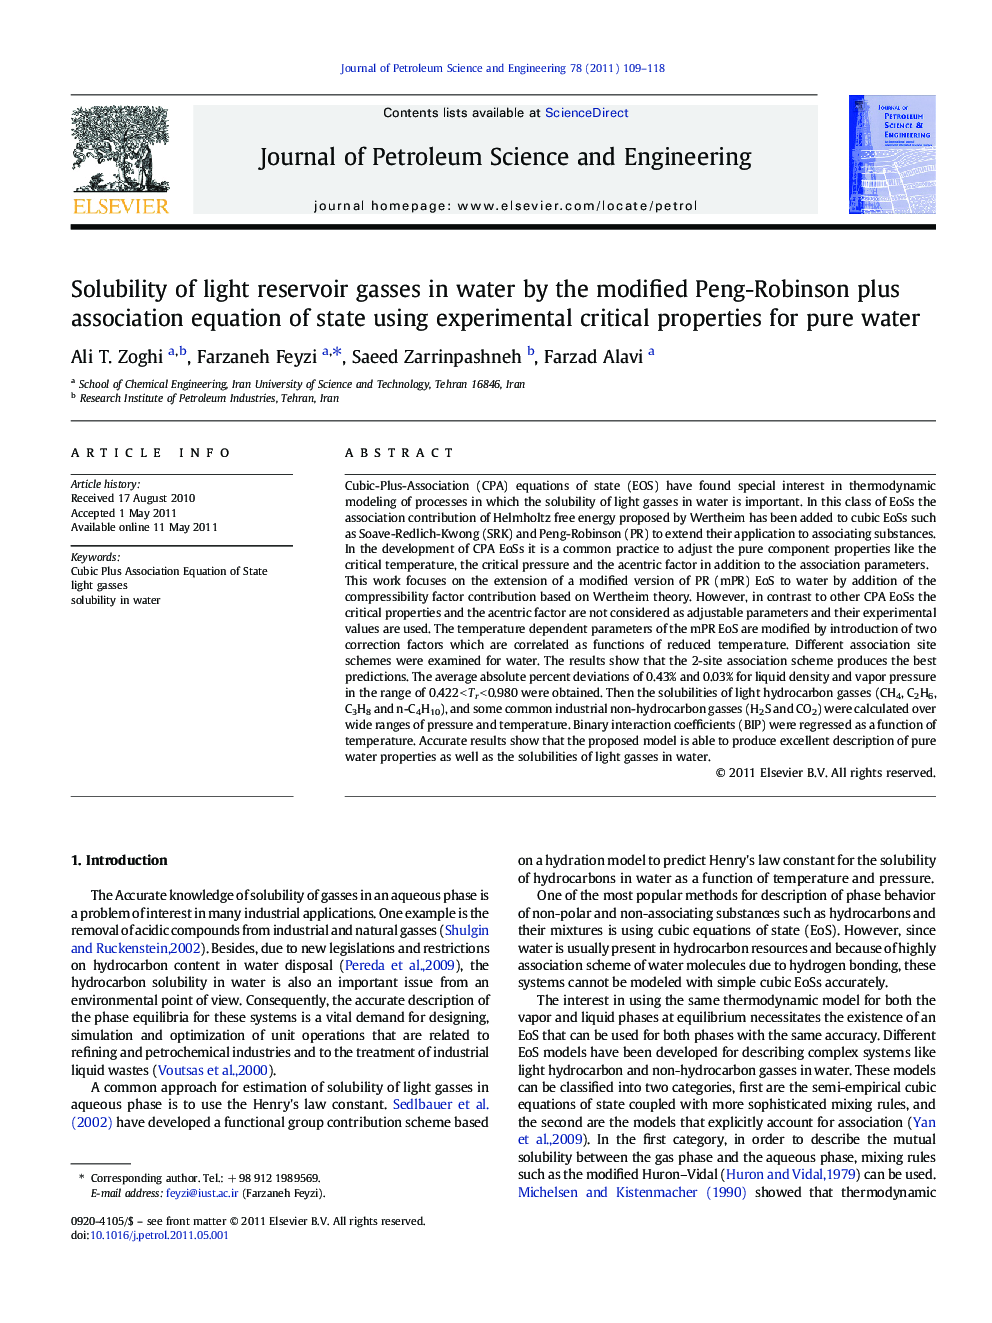 Solubility of light reservoir gasses in water by the modified Peng-Robinson plus association equation of state using experimental critical properties for pure water